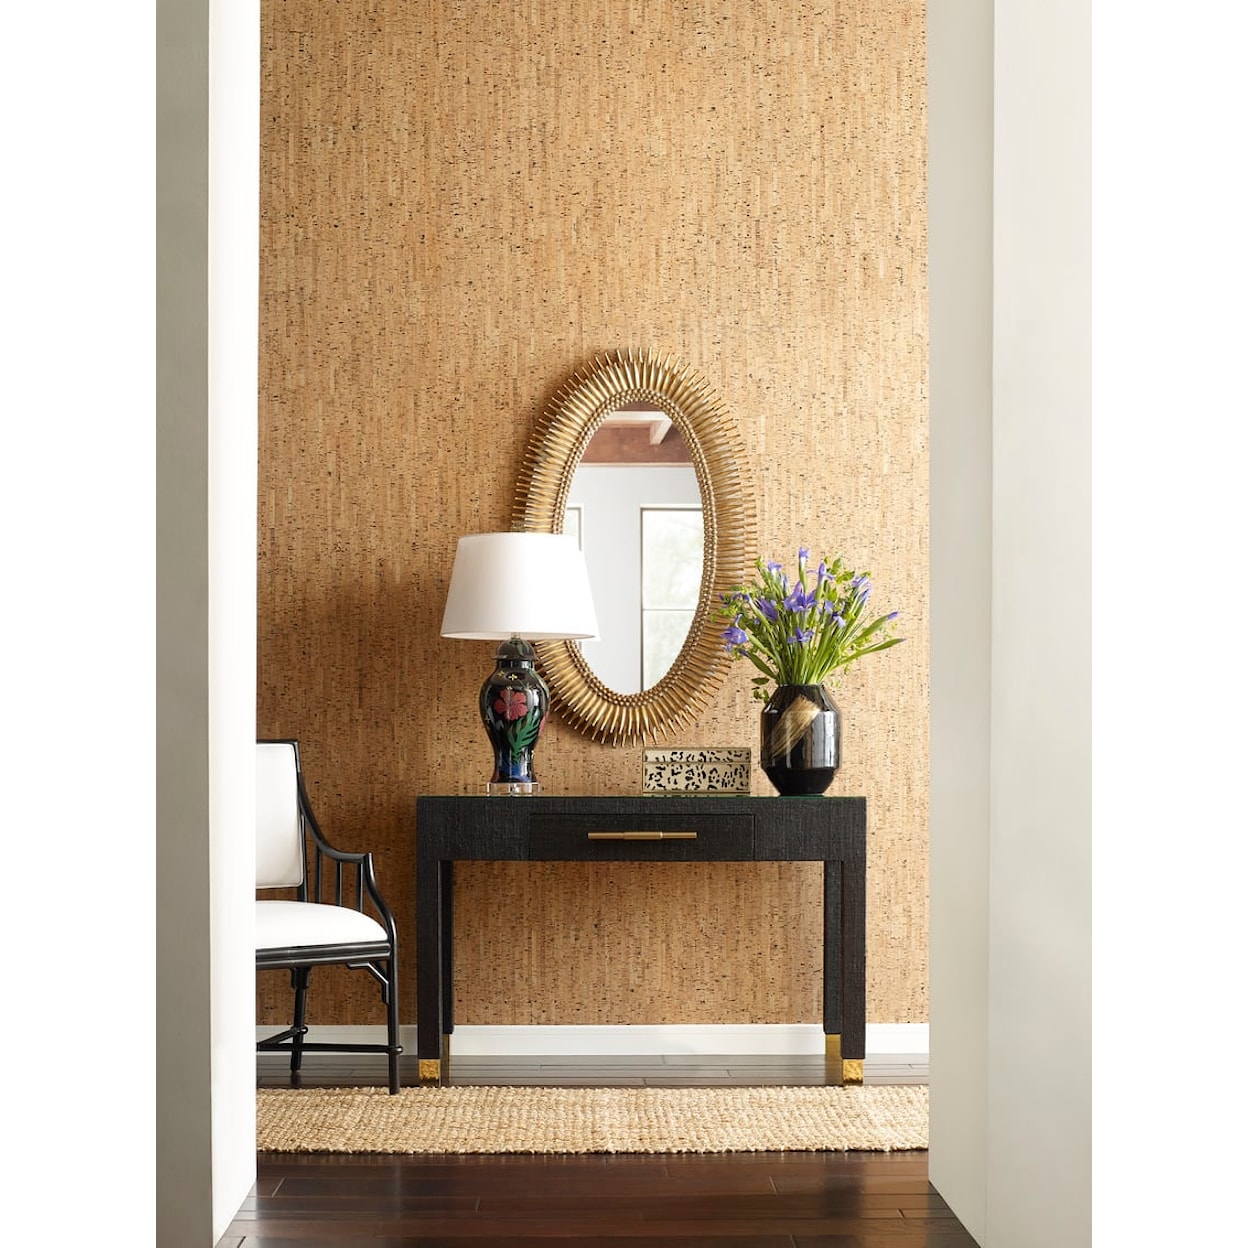 Wildwood Lamps Mirrors LUCIUS MIRROR- GOLD